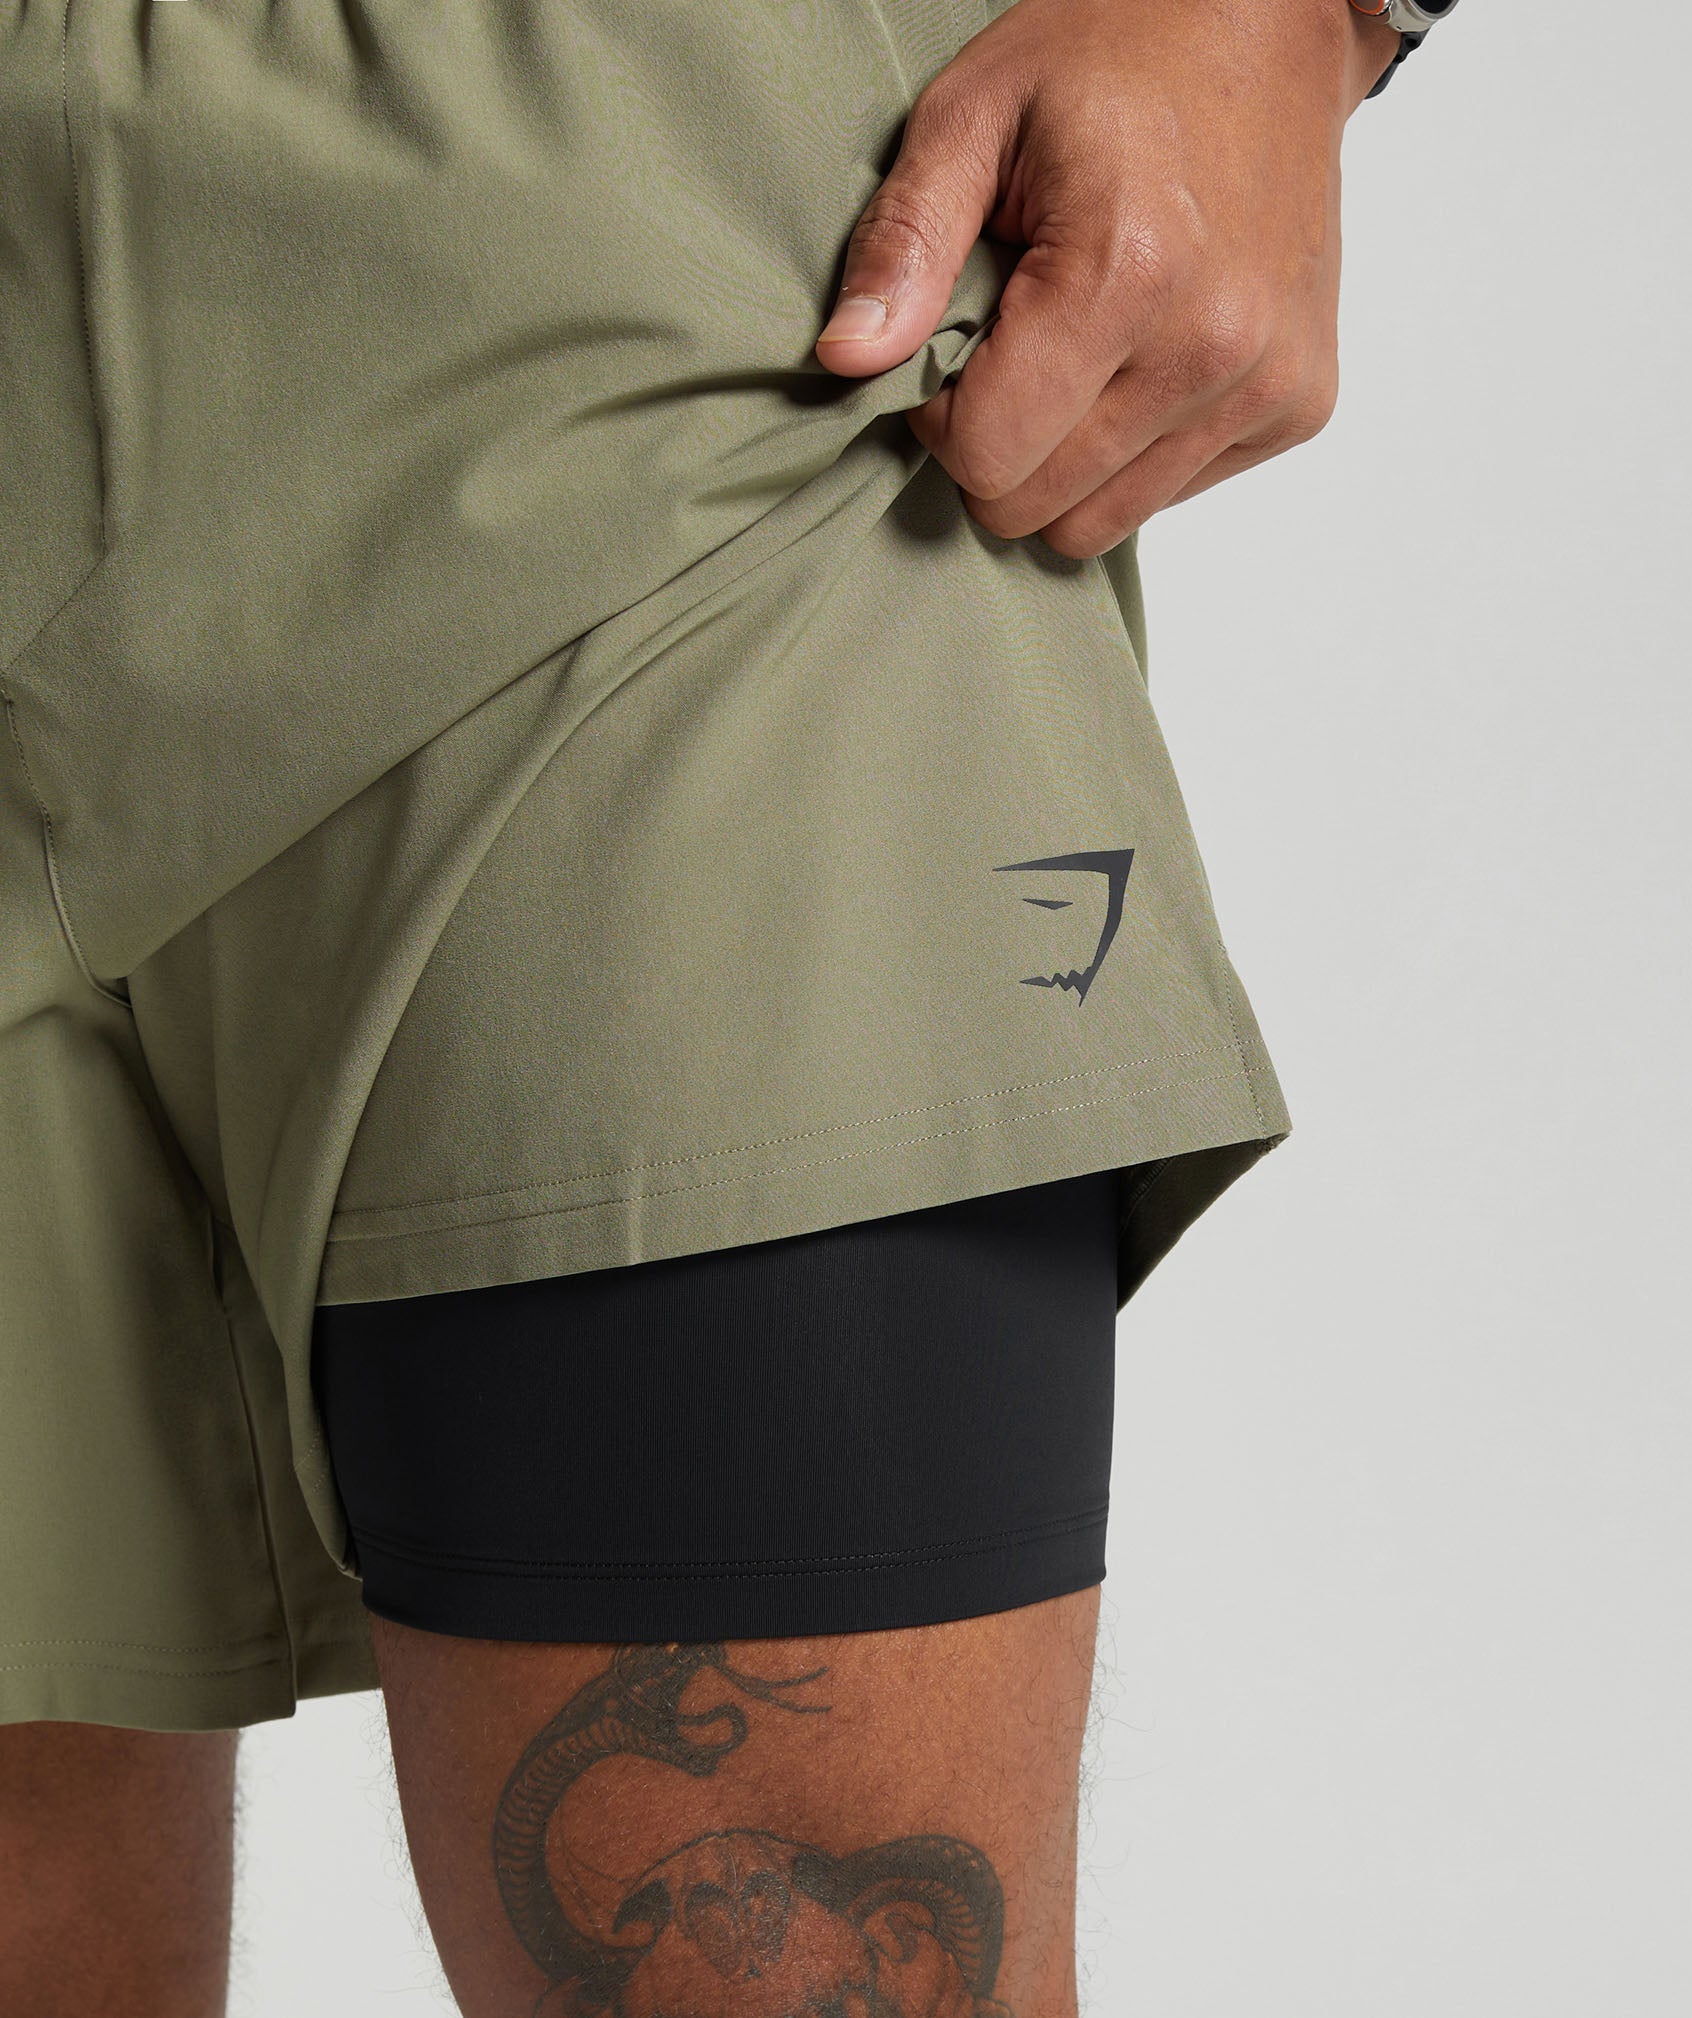 Land to Water 6" Shorts in Utility Green - view 9